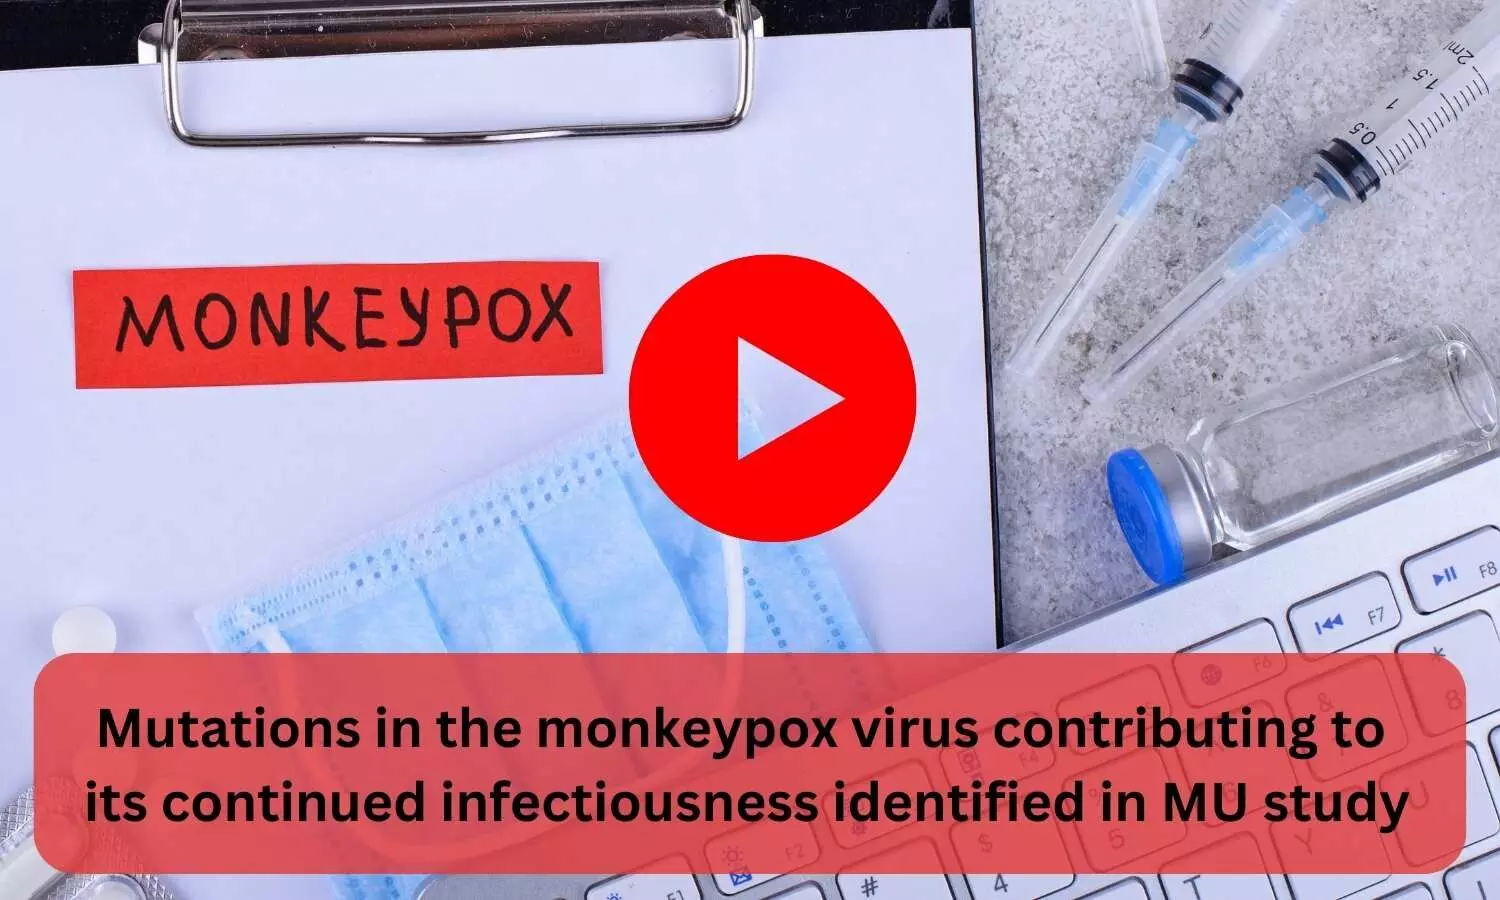 Mutations in the monkeypox virus contributing to its continued infectiousness identified in MU study